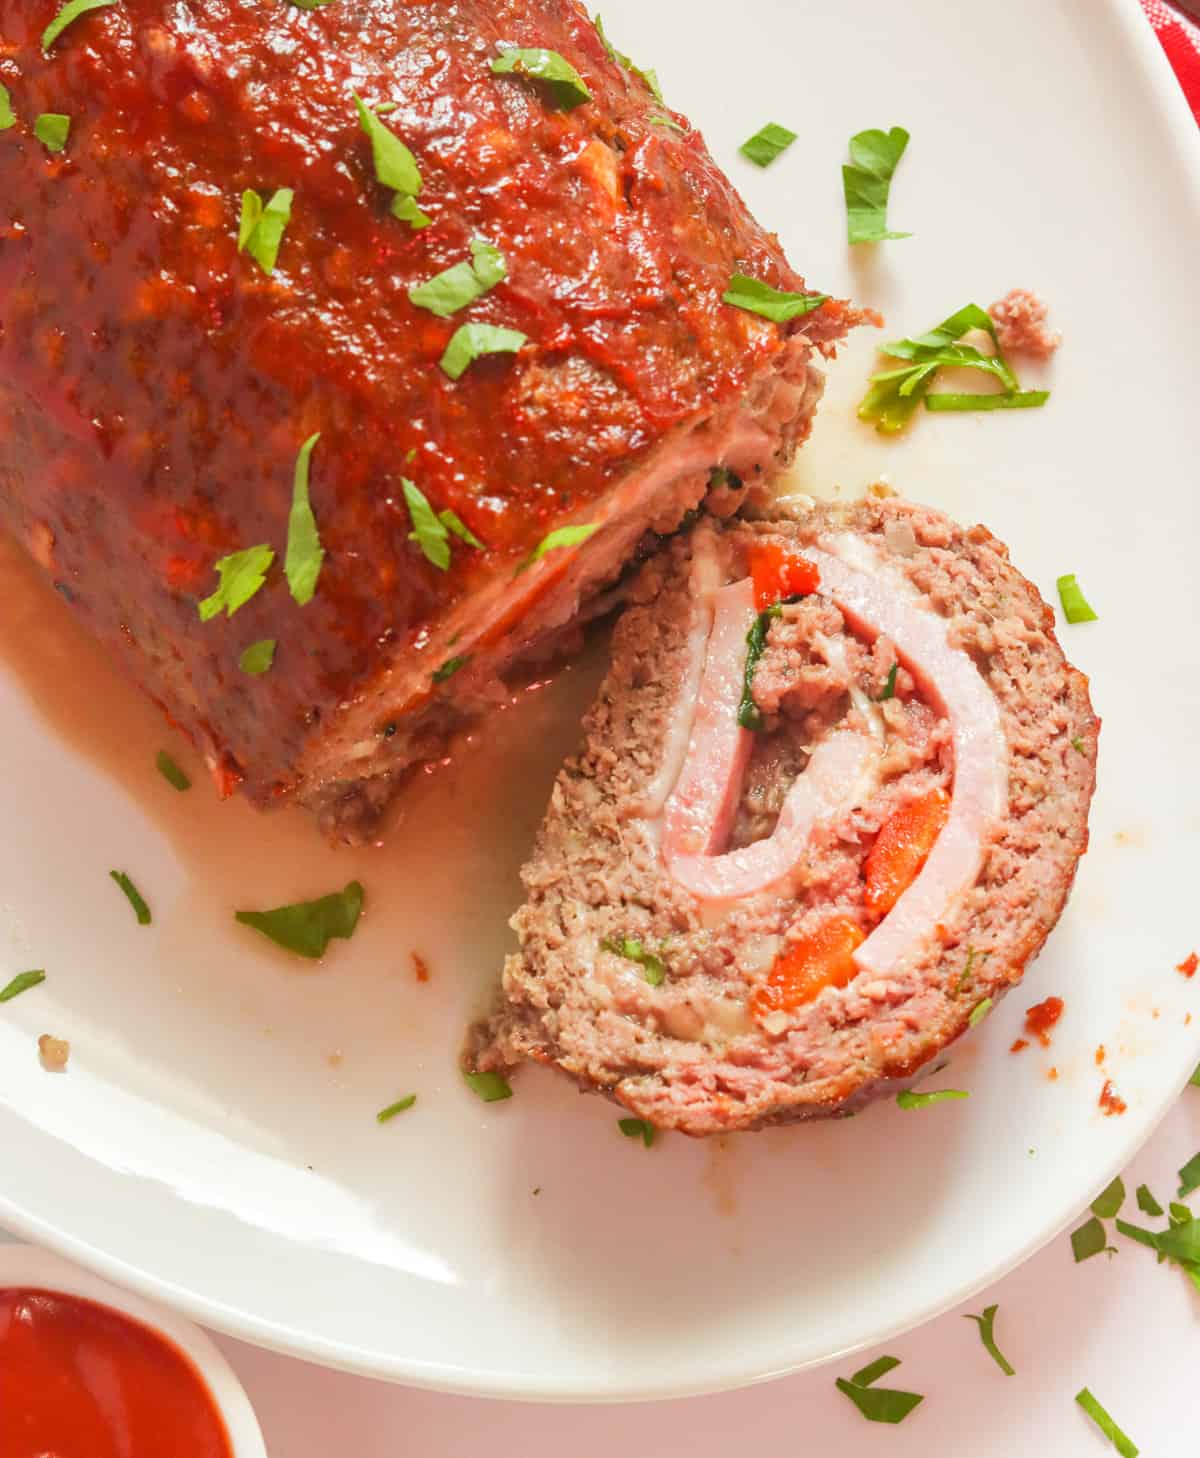 Delicious meatloaf fillings for the ultimate in comfort food